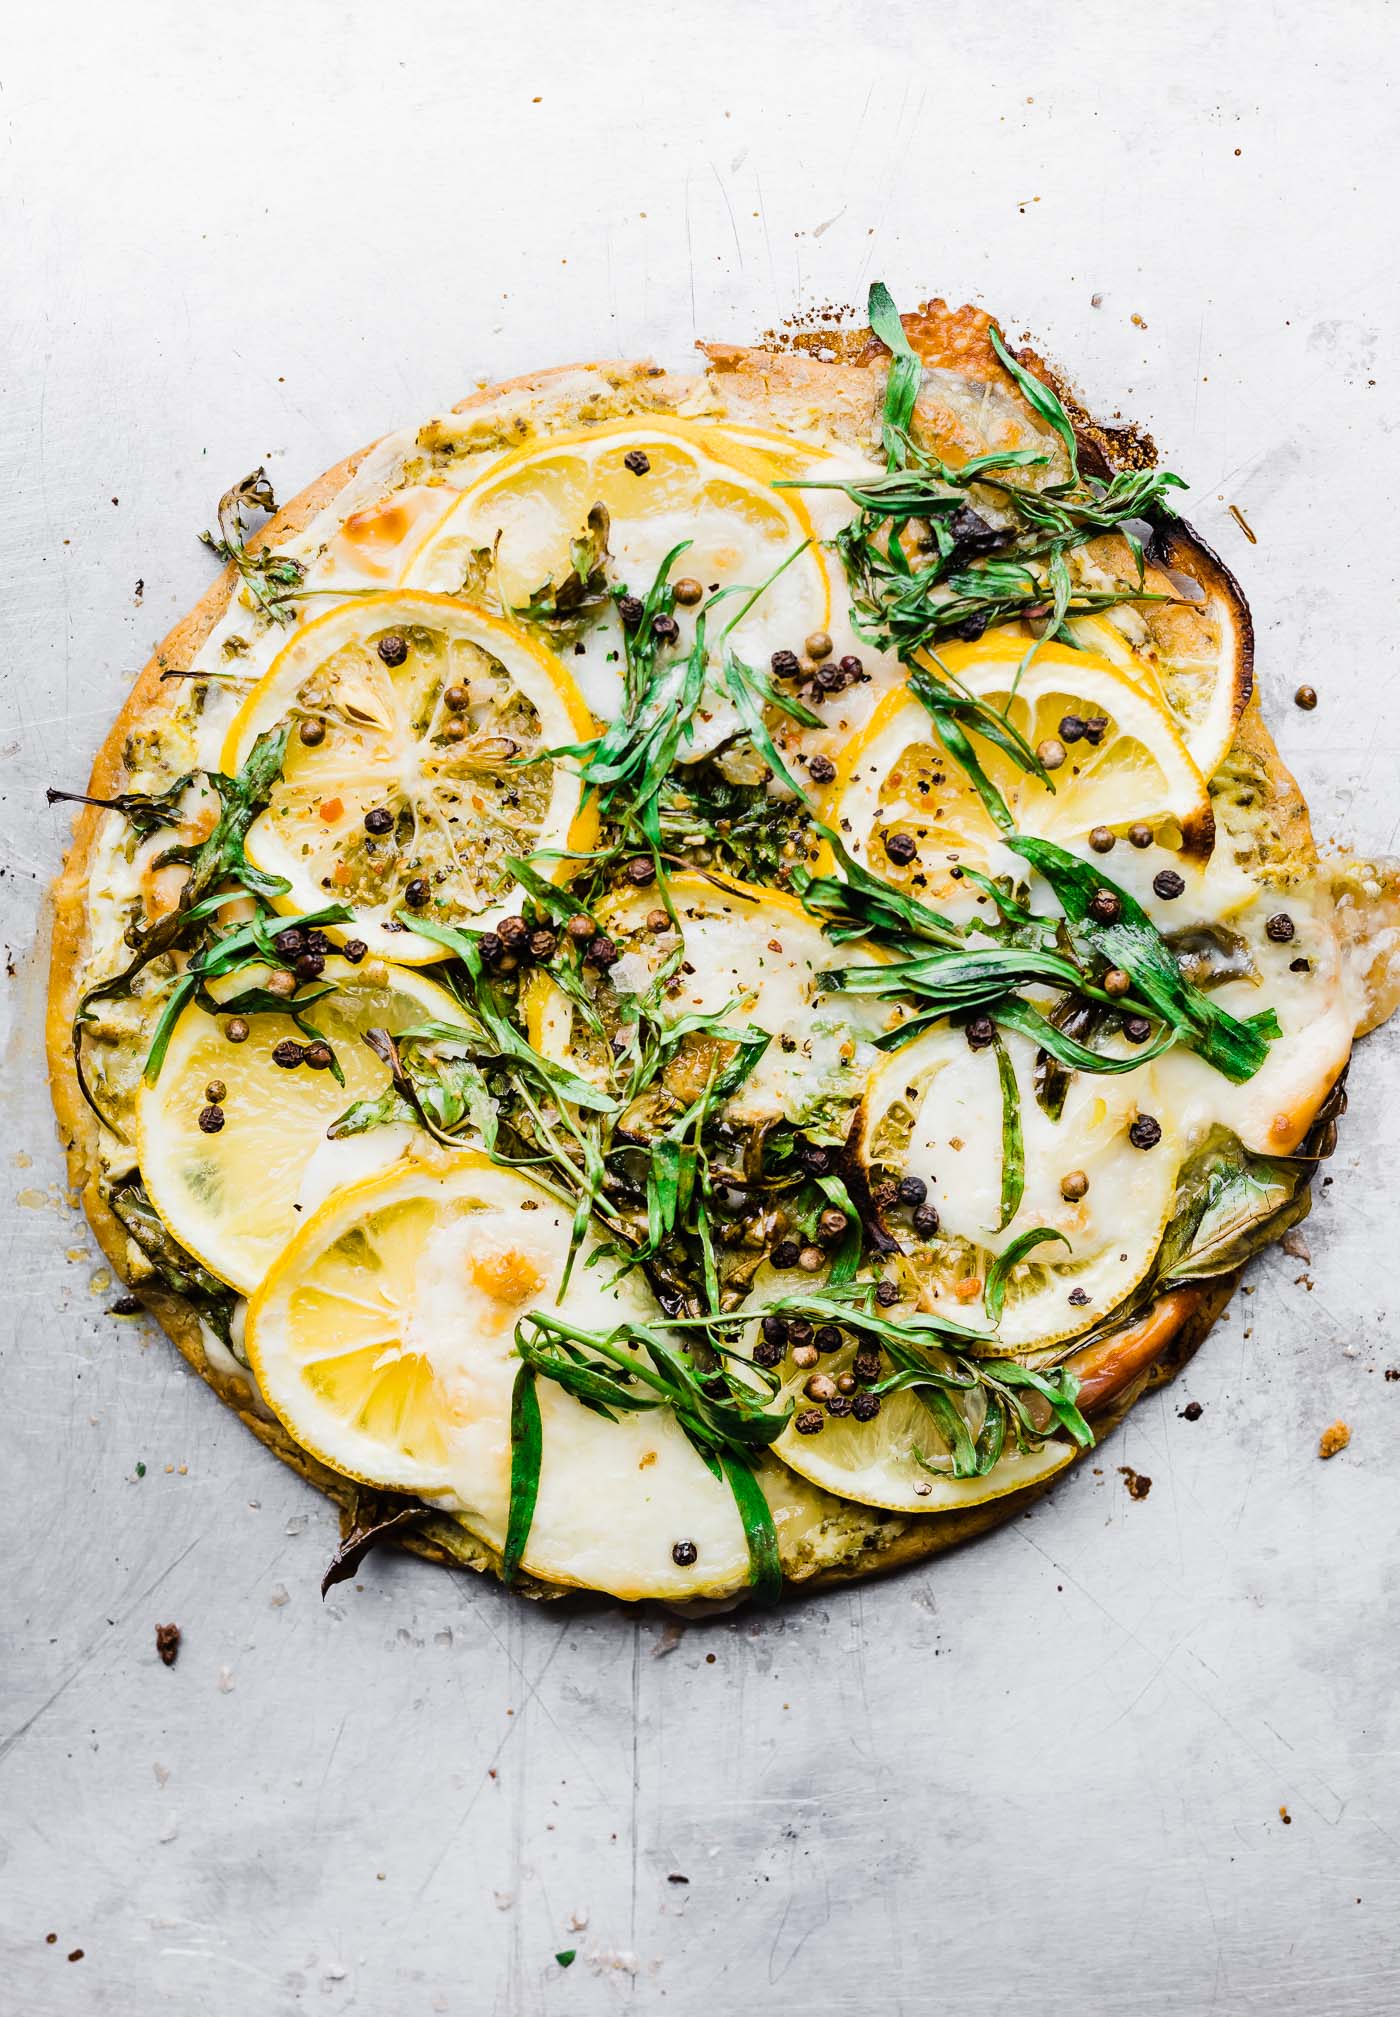 Overhead view lemon herb socca pizza topped with baked in lemon slices and fresh herbs.